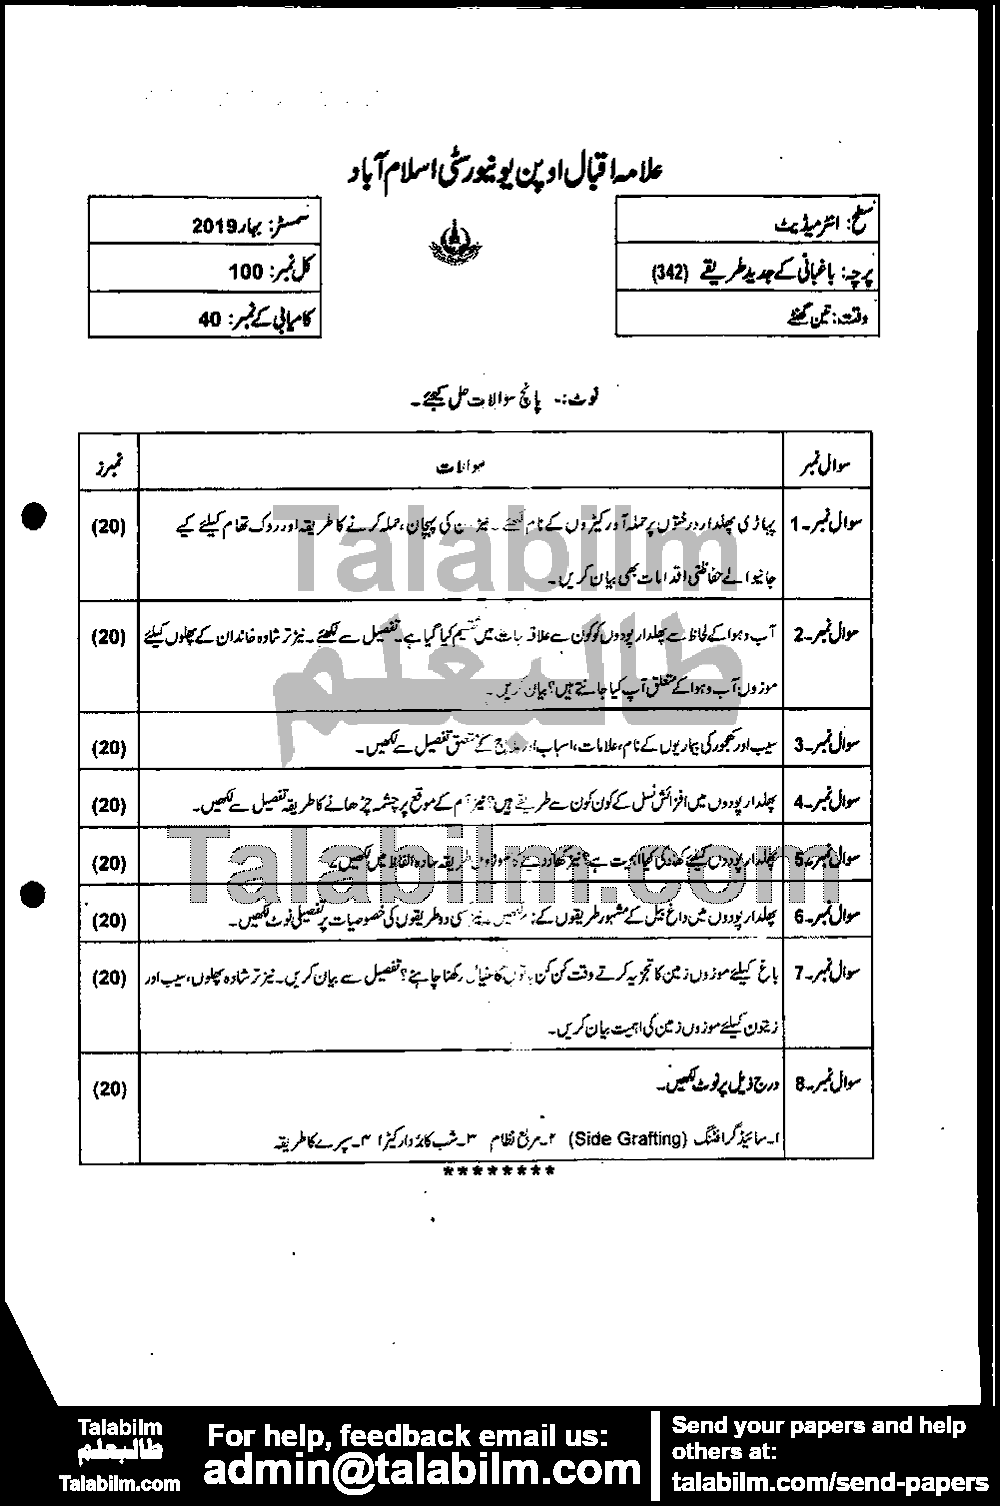 Baghbani Ky Amli Tareeqy 342 past paper for Spring 2019